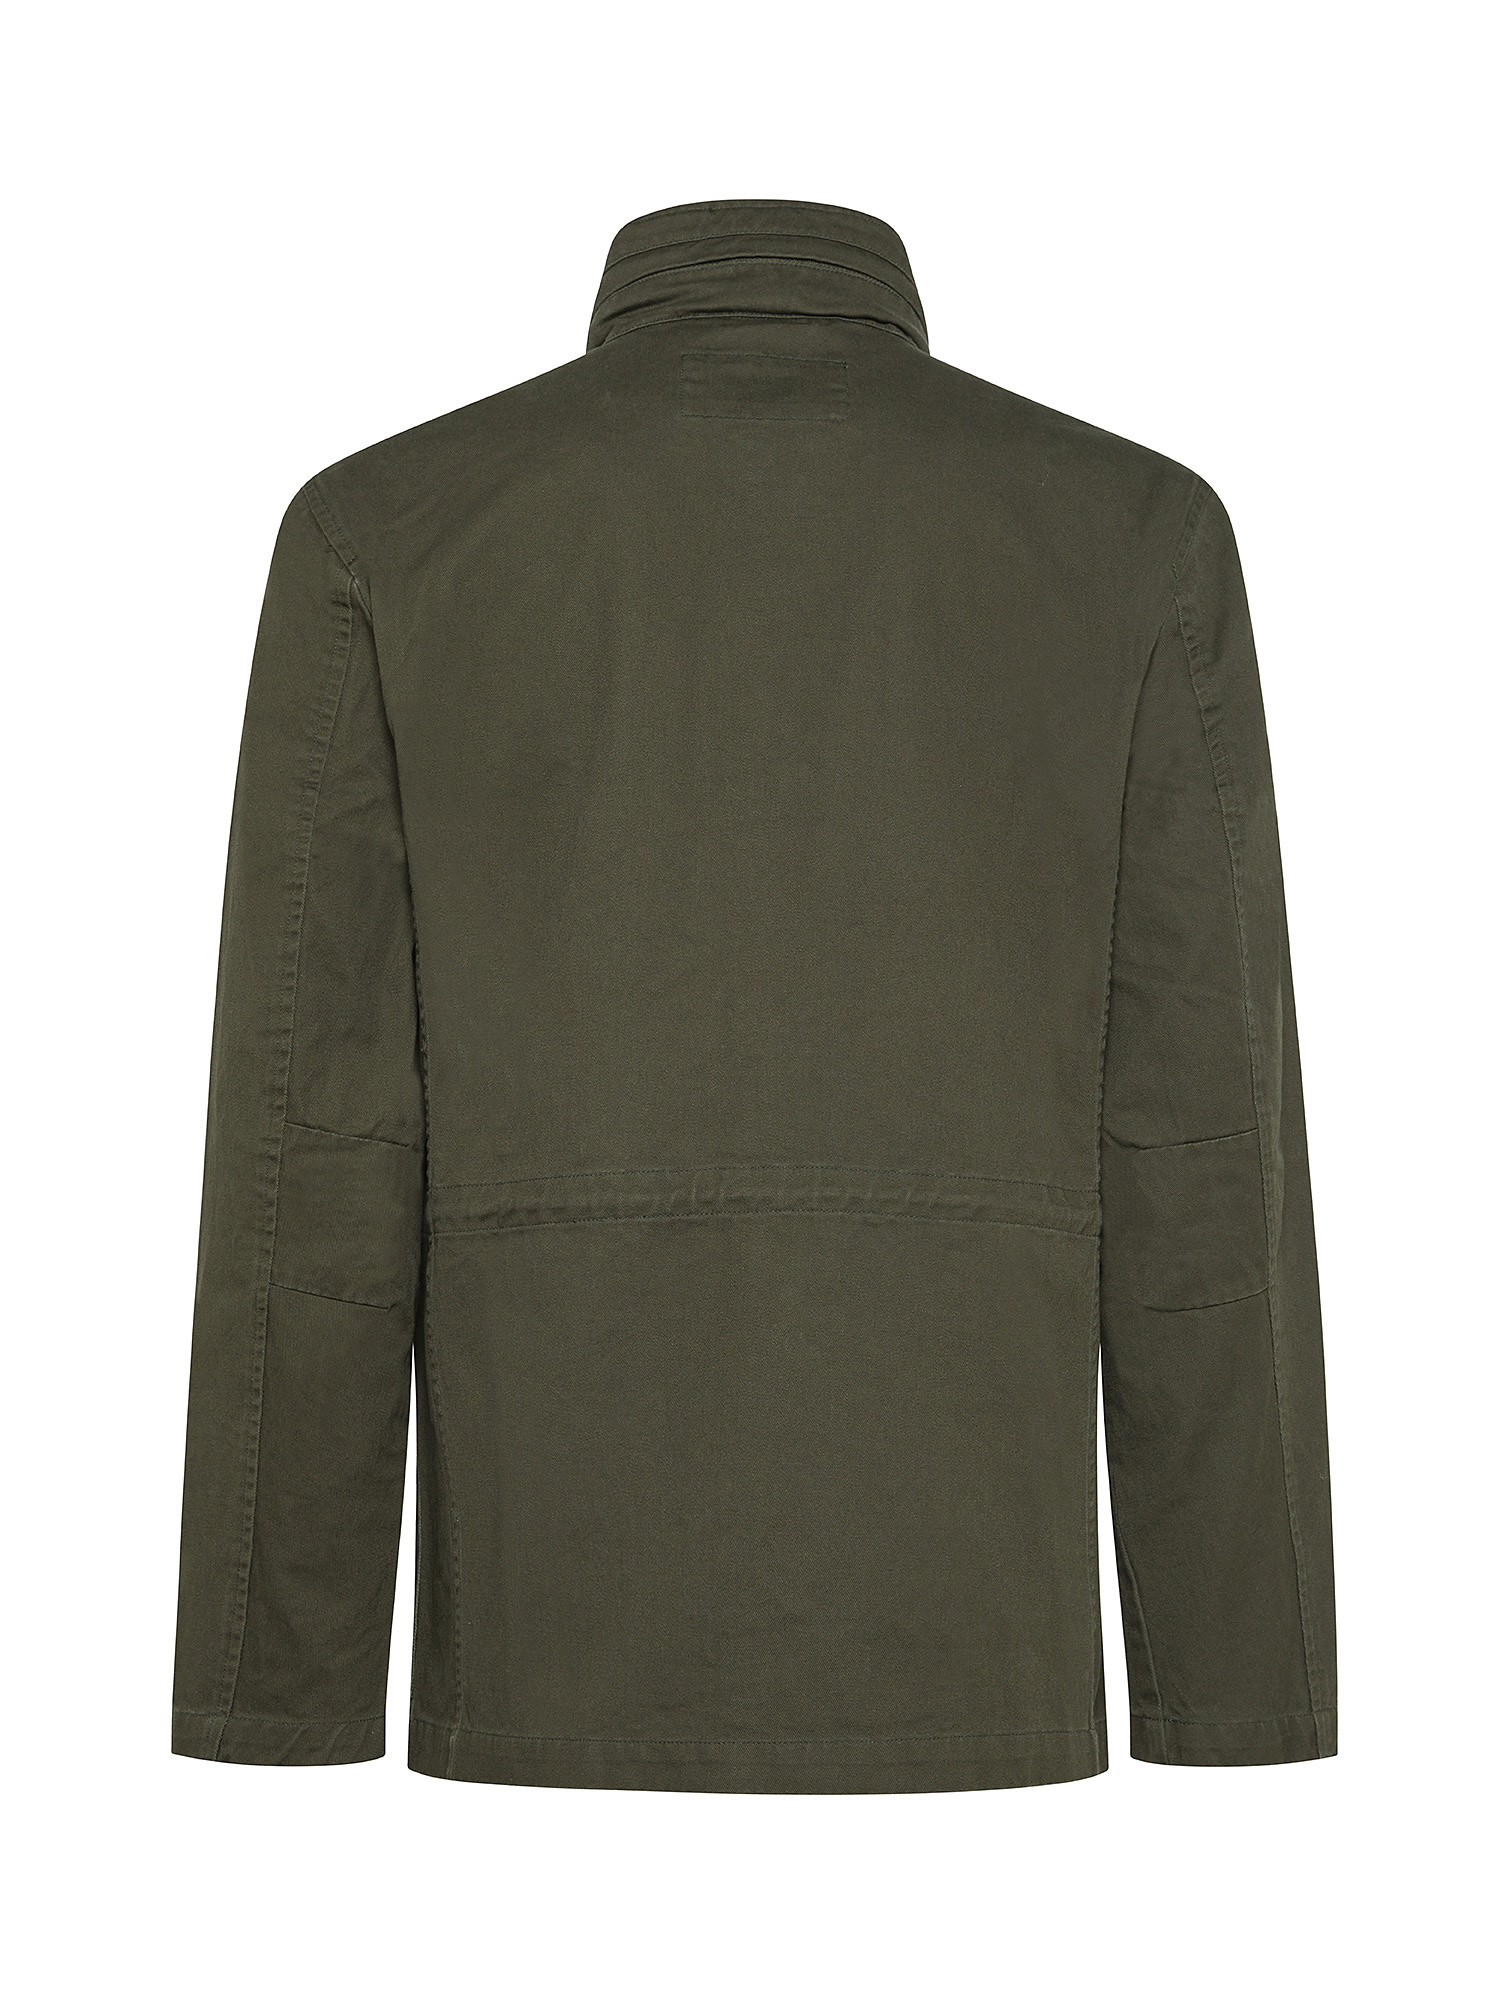 JCT - Jacket in pure cotton, Dark Green, large image number 1